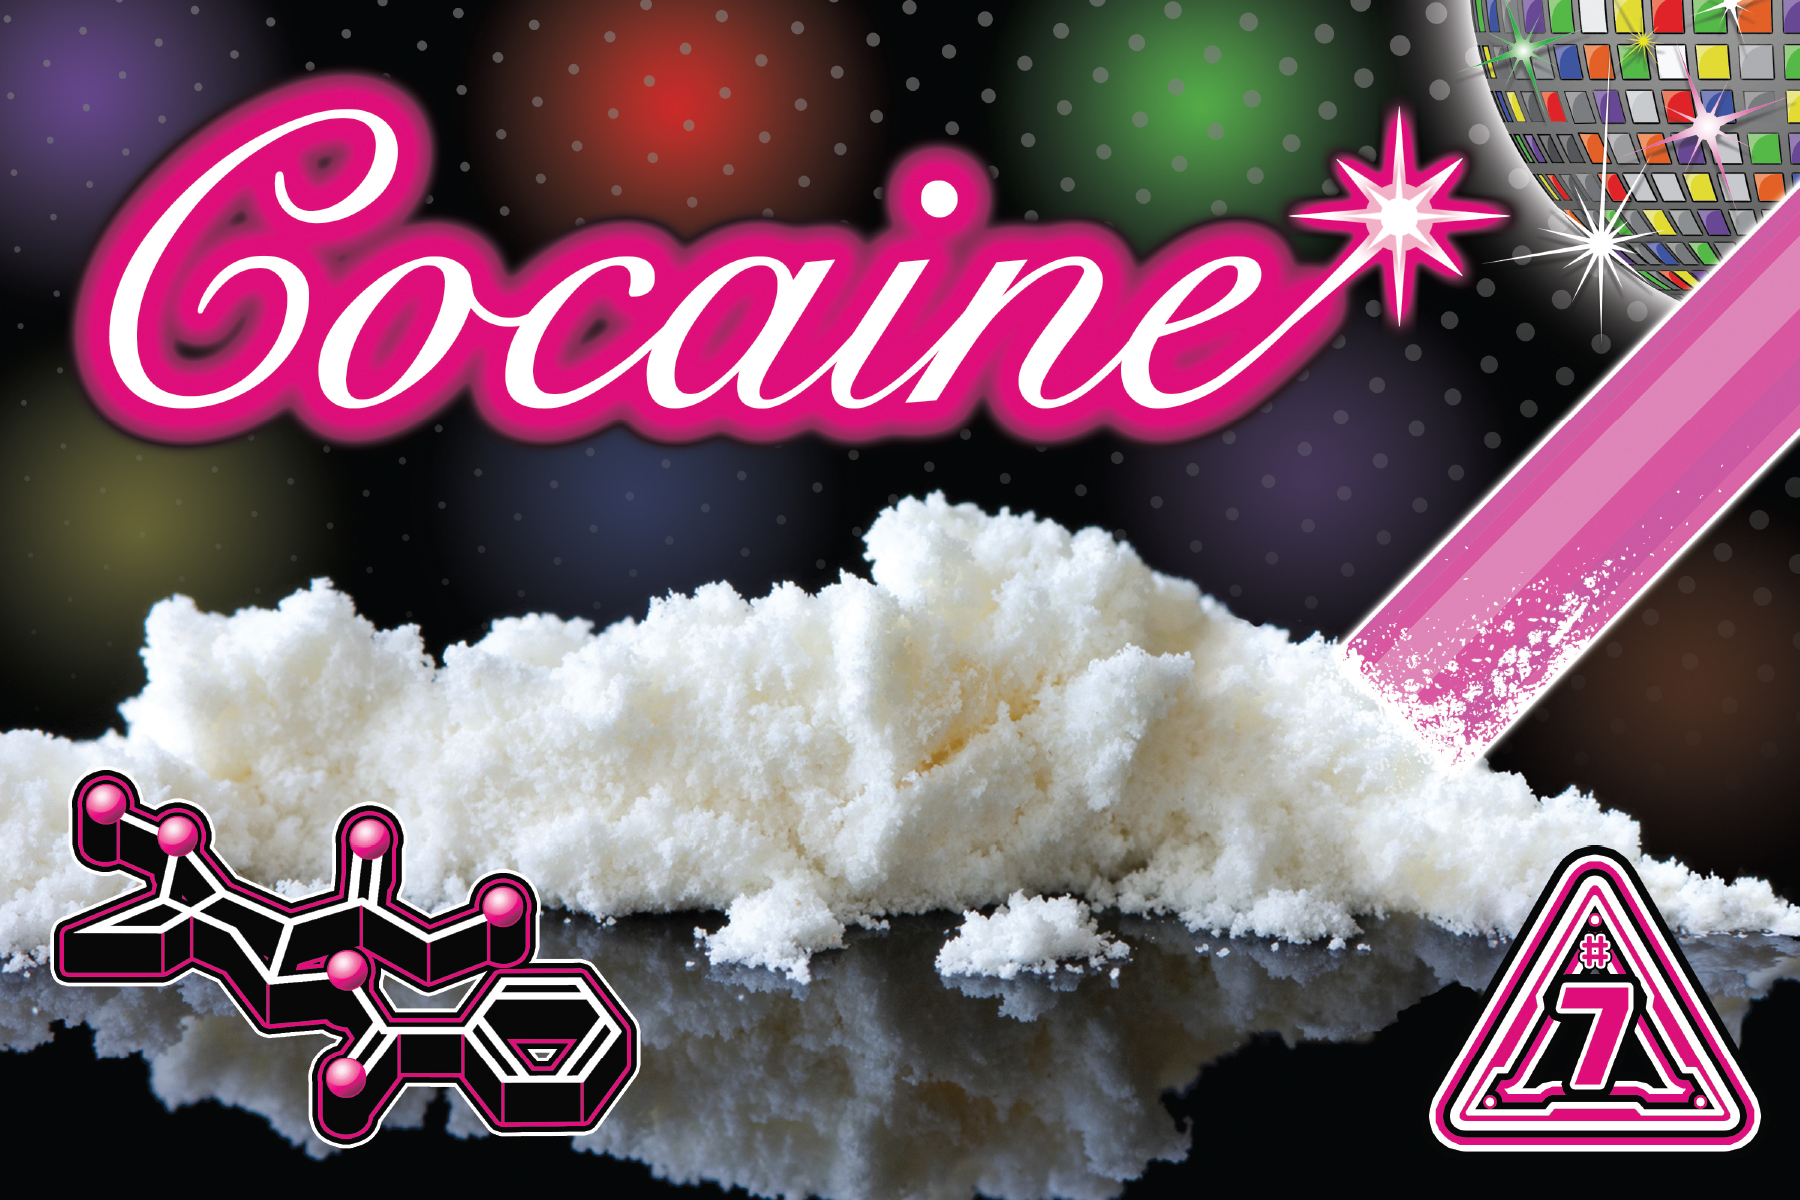 The front of the DanceSafe cocaine card.